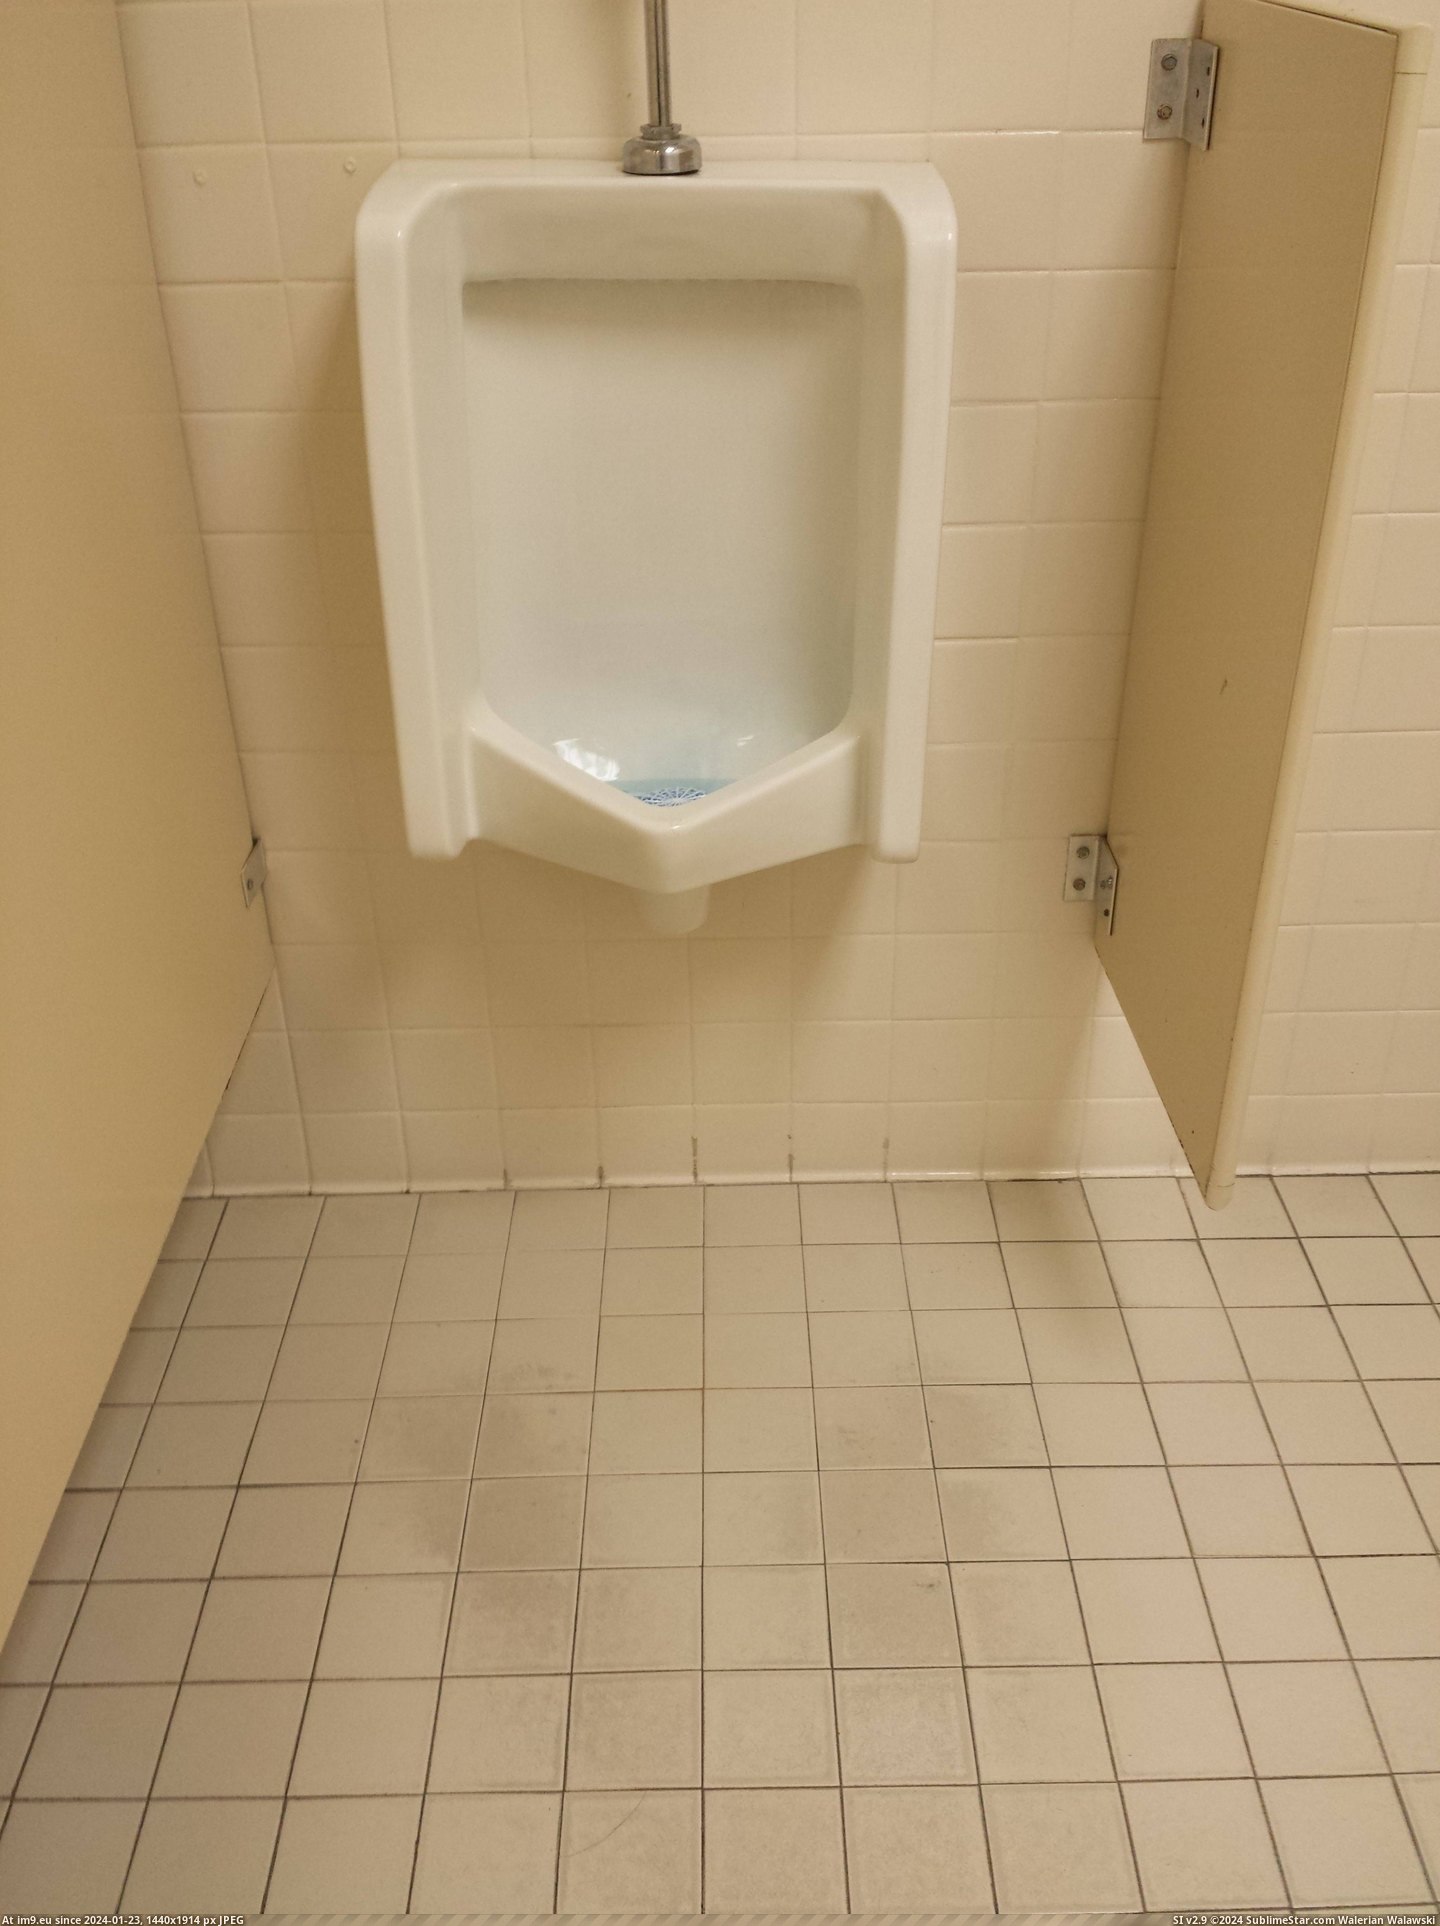 #Are #Front #Footprints #Job #Urinal [Mildlyinteresting] There are footprints in front of the urinal at my job. Pic. (Изображение из альбом My r/MILDLYINTERESTING favs))